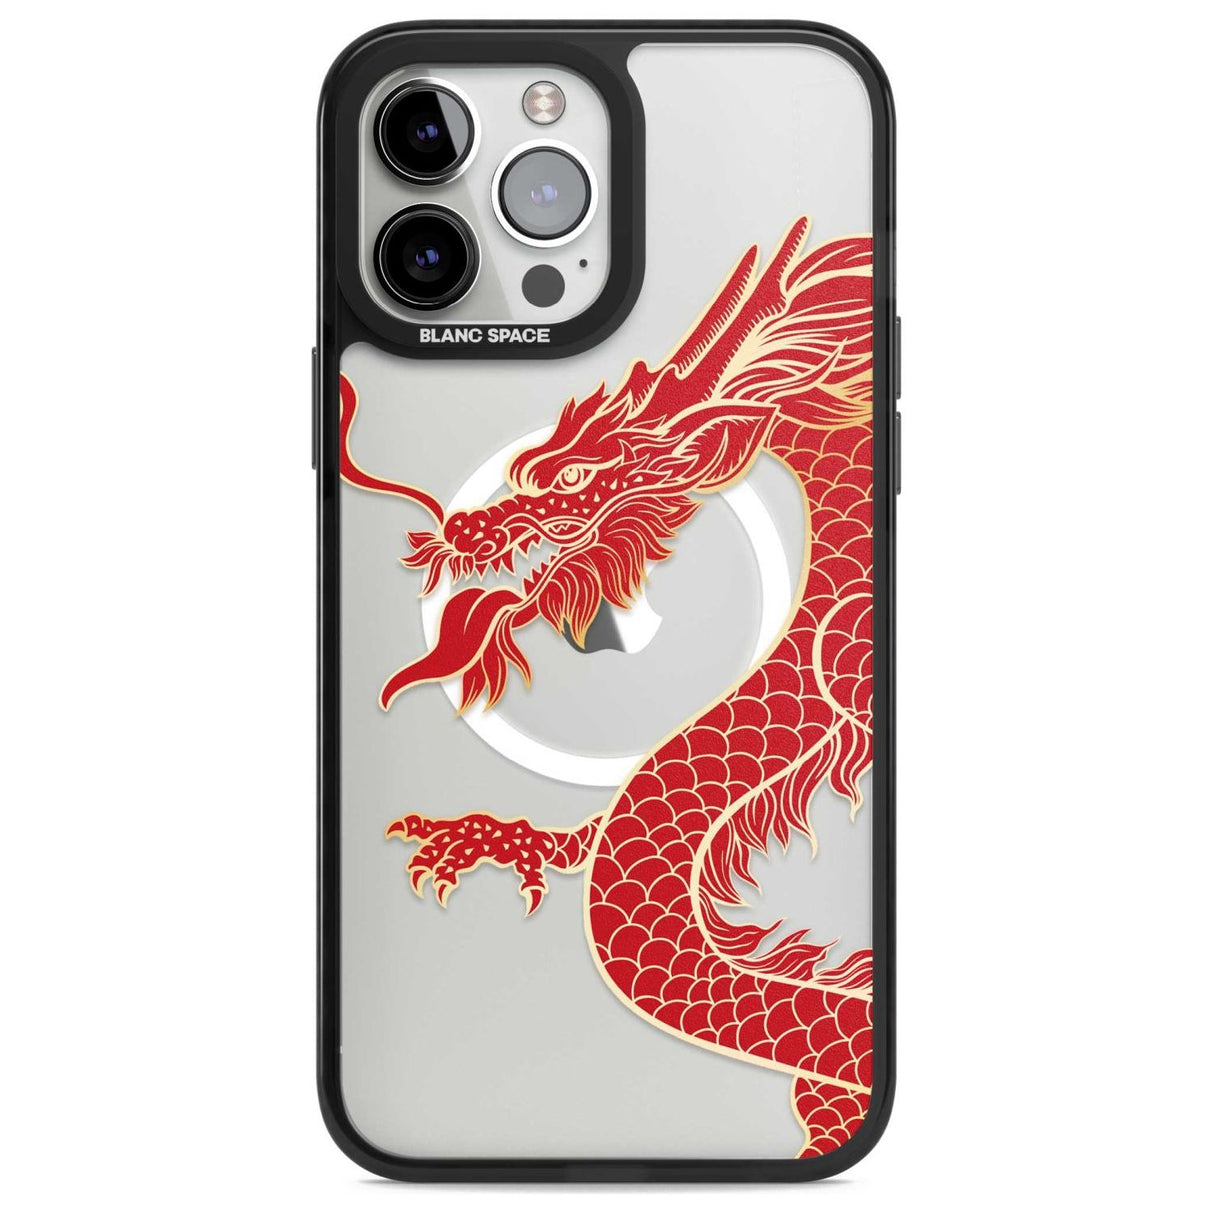 Large Red Dragon Phone Case iPhone 13 Pro Max / Magsafe Black Impact Case Blanc Space